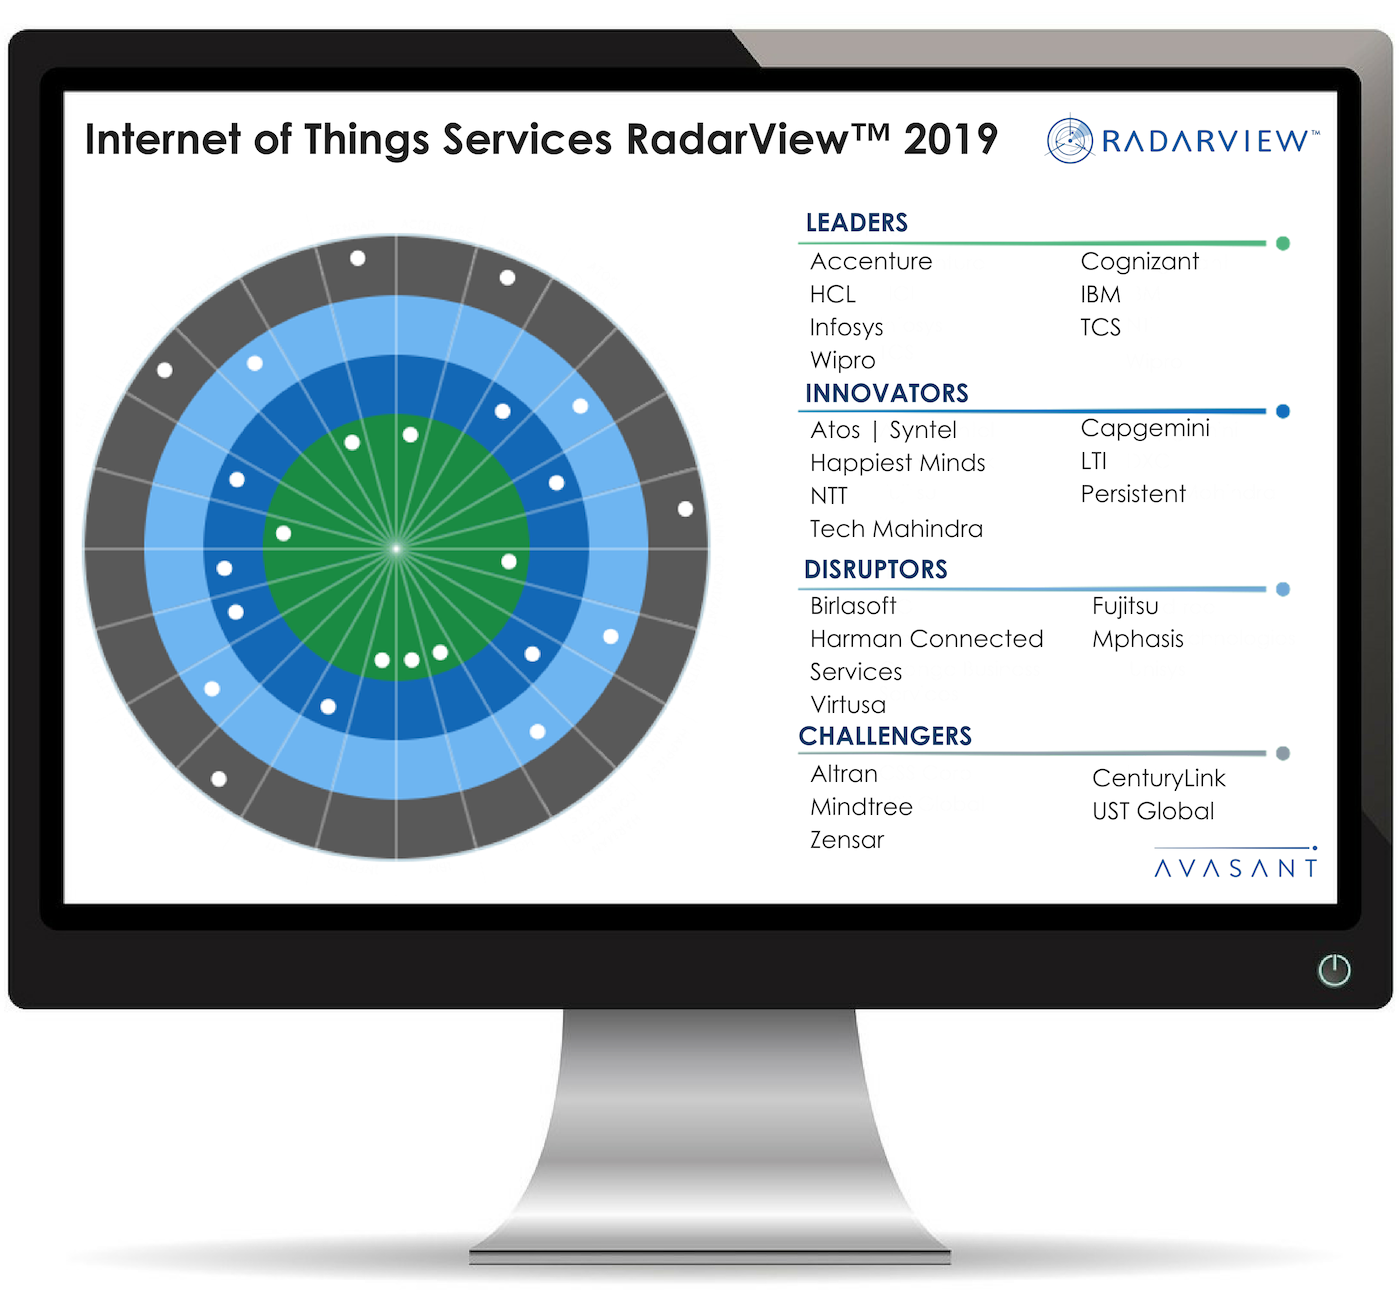 IoT Graphic Updated for provider profiles 1 - Internet of Things 2019 UST Global RadarView™ Profile